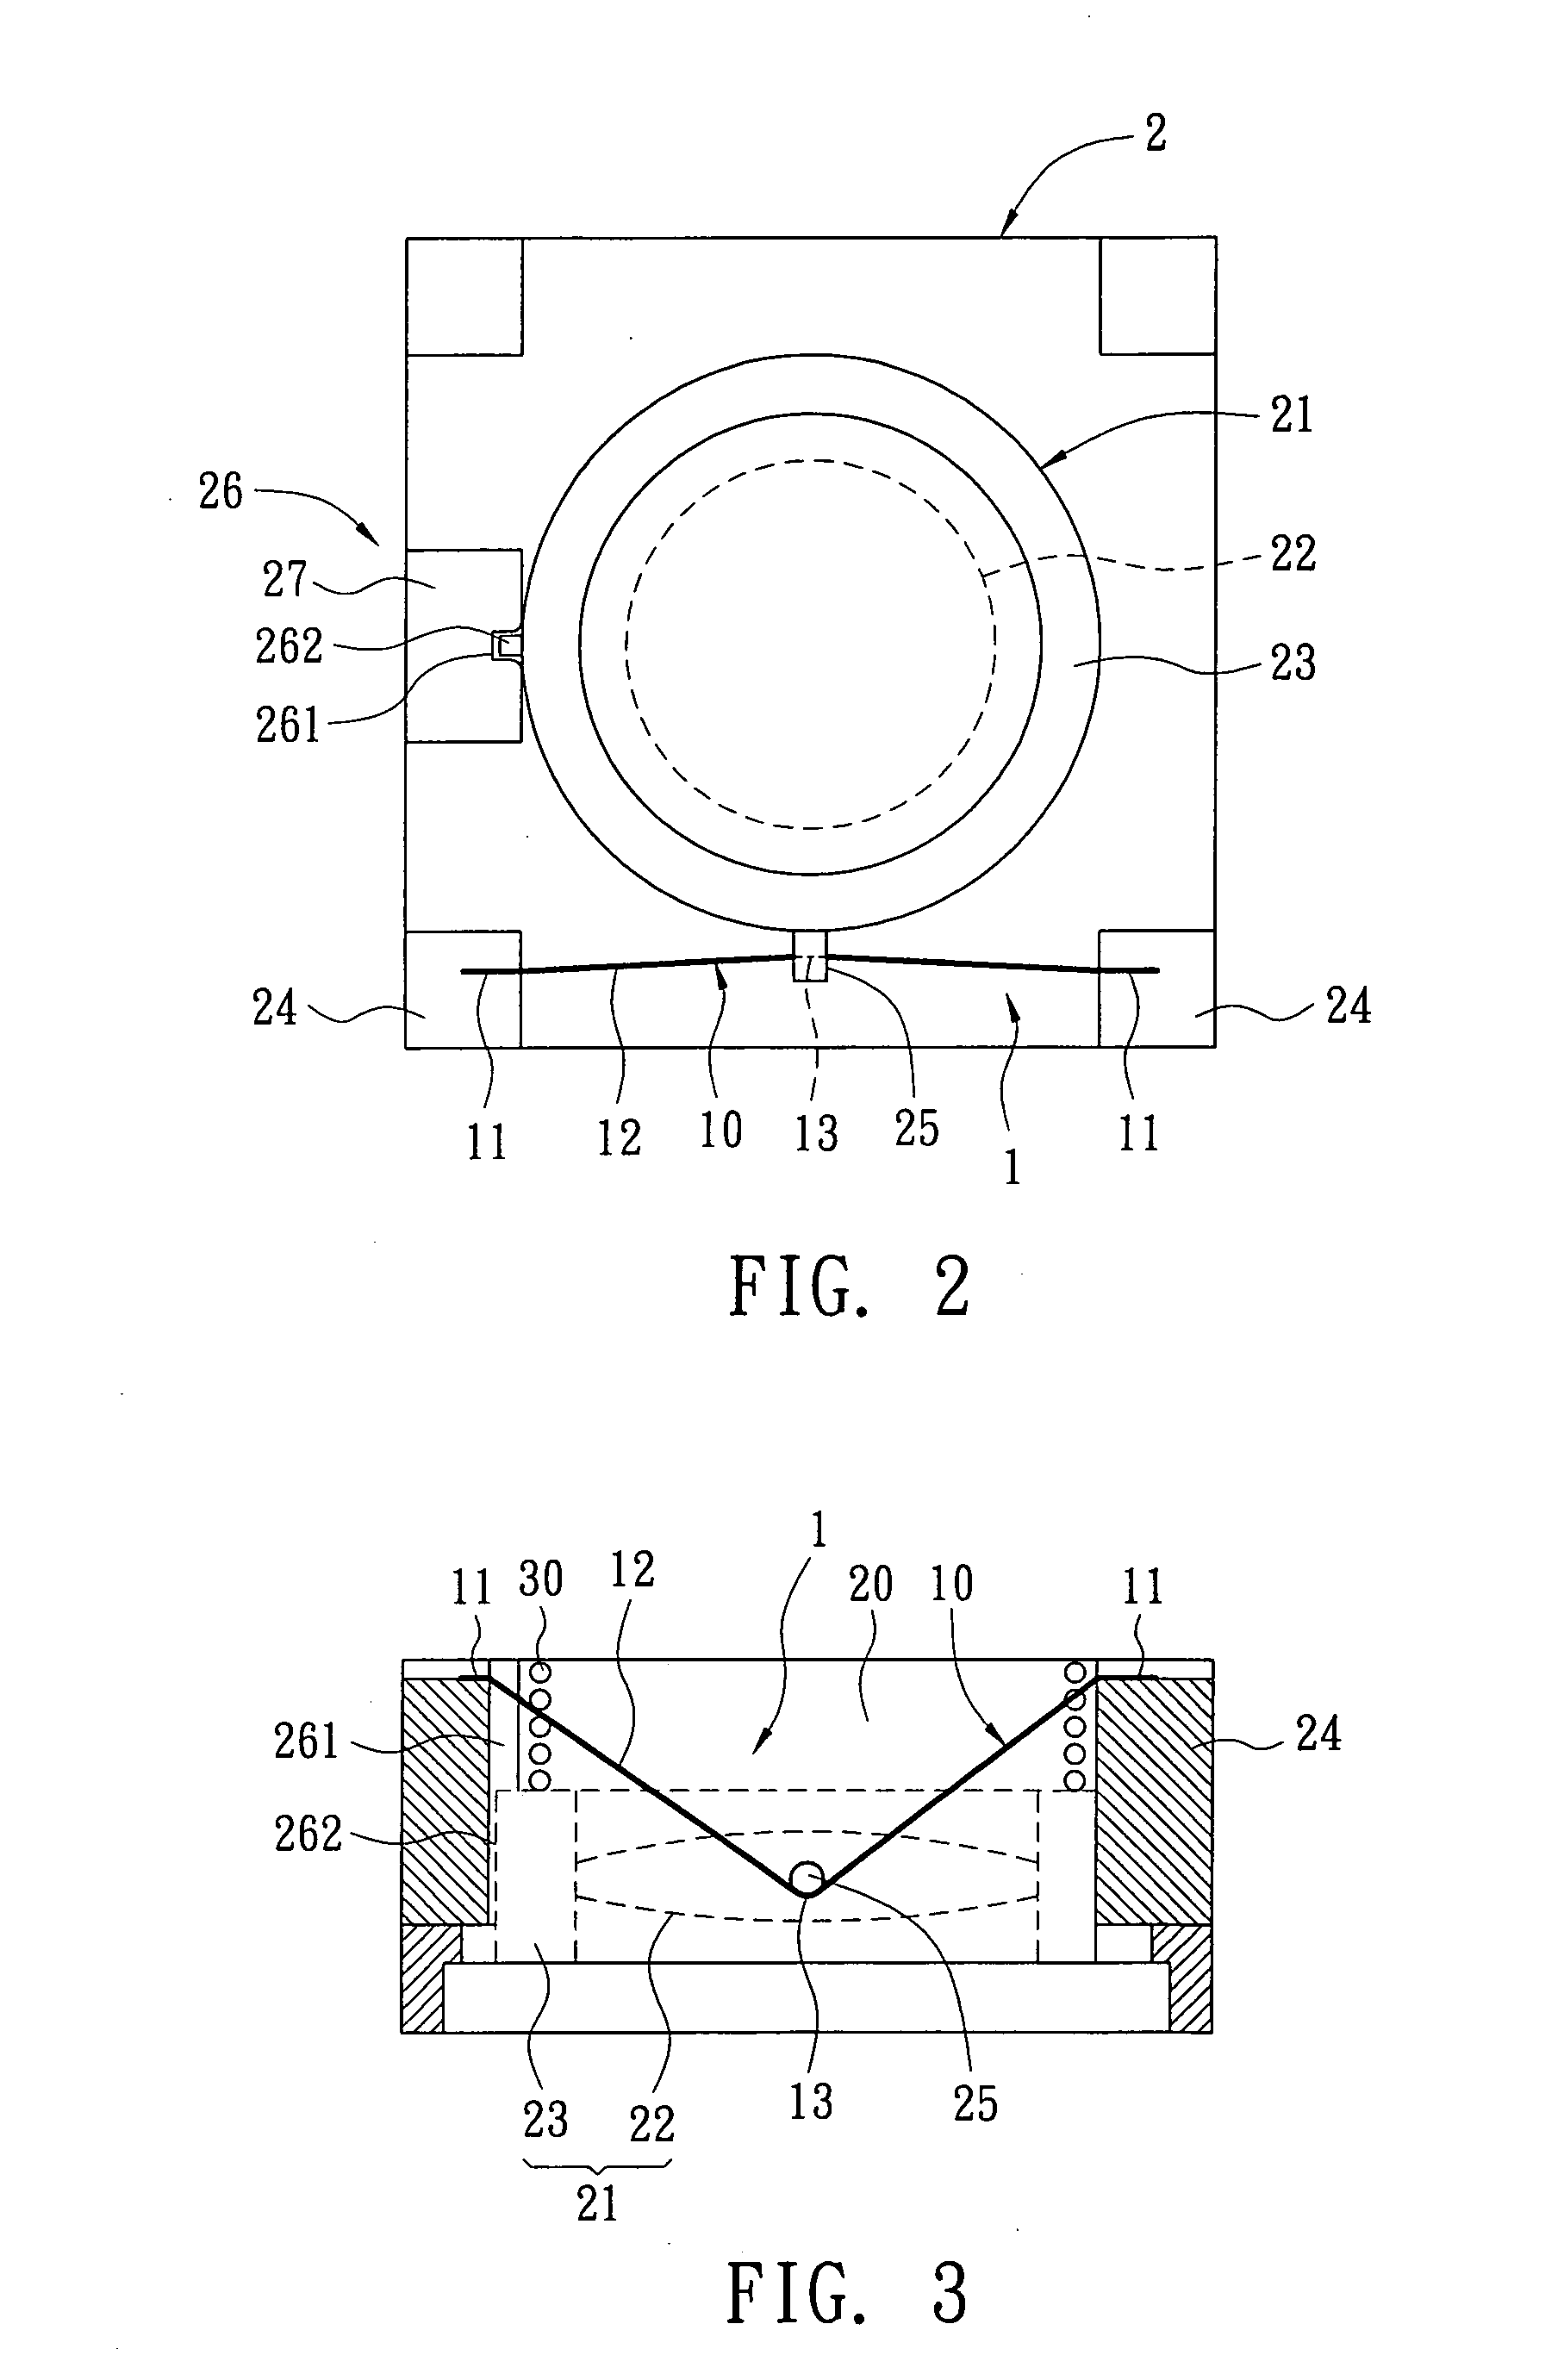 Lens displacement mechanism using shaped memory alloy